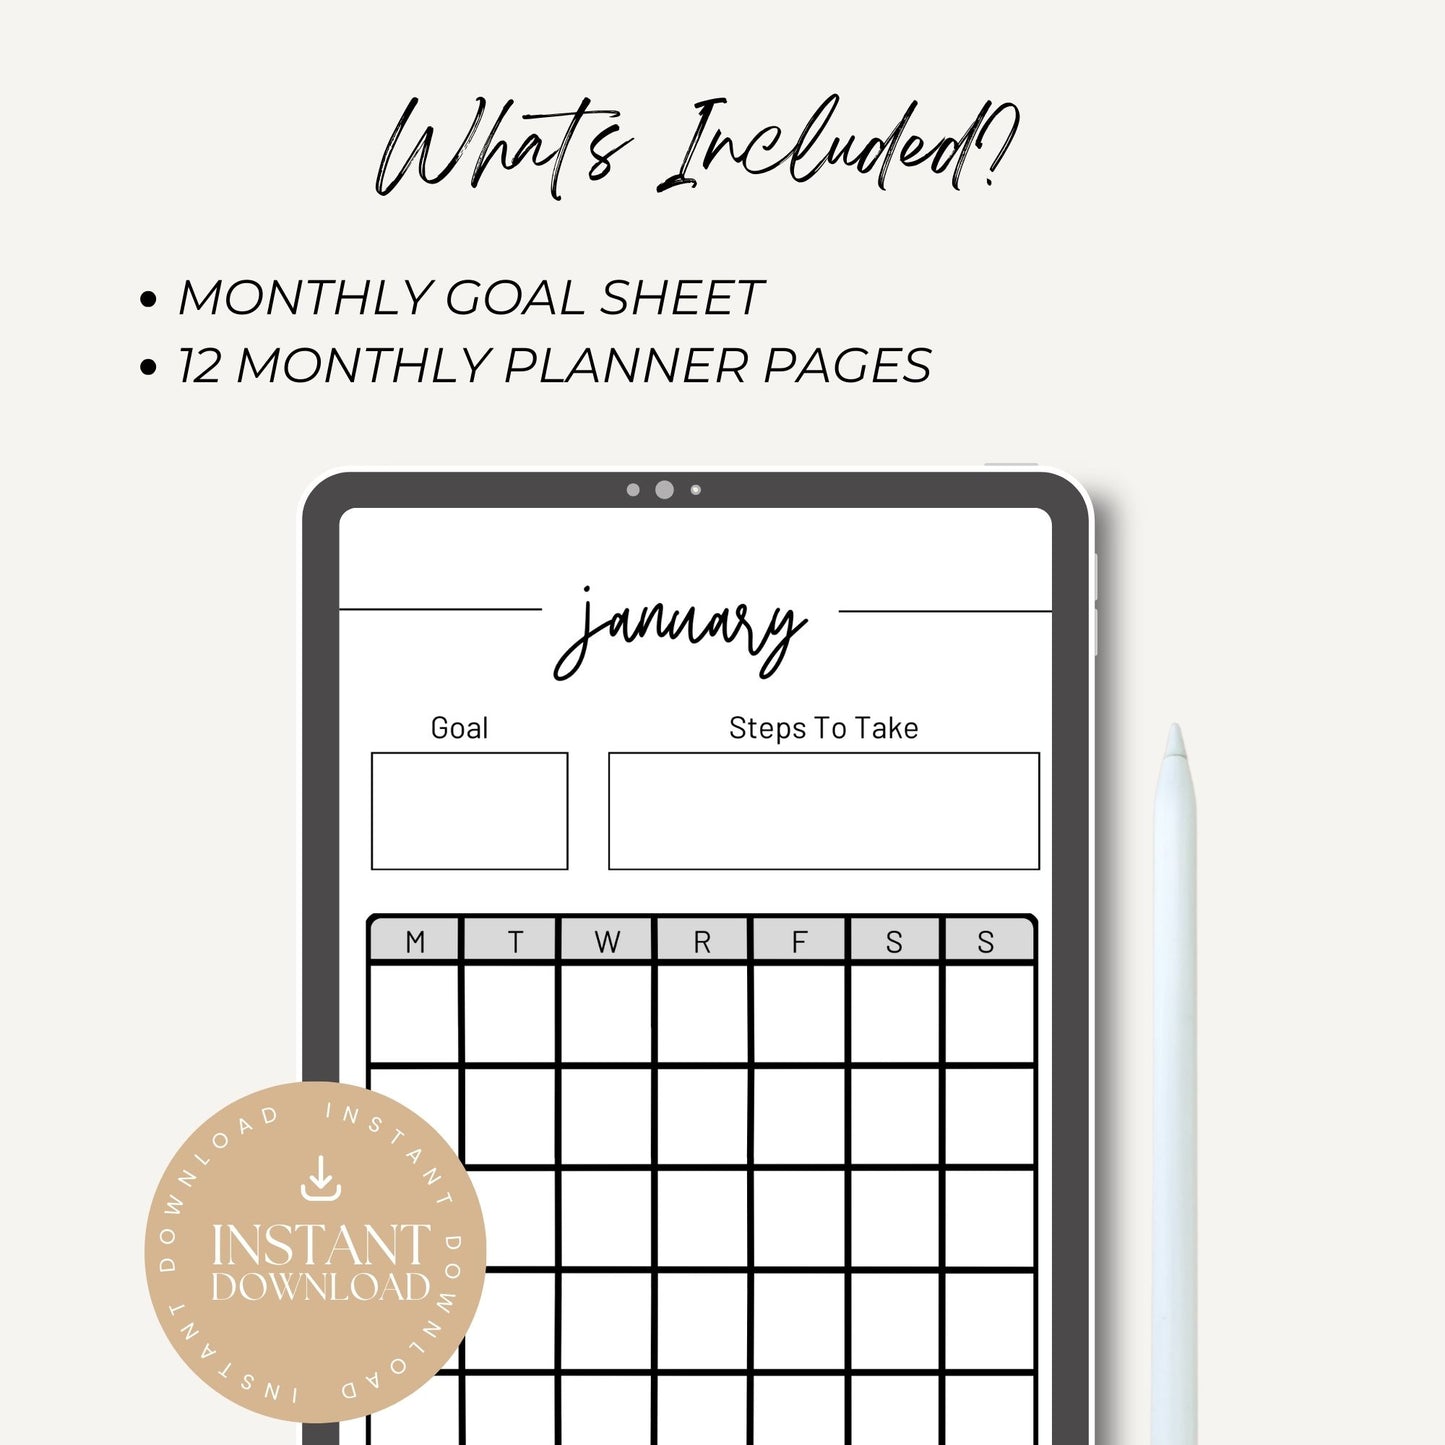 Minimalist Undated Wedding Planner Printable, Monthly Wedding Goal Setting Template, Monthly Goal Progress Tracker, Instant Download PDF